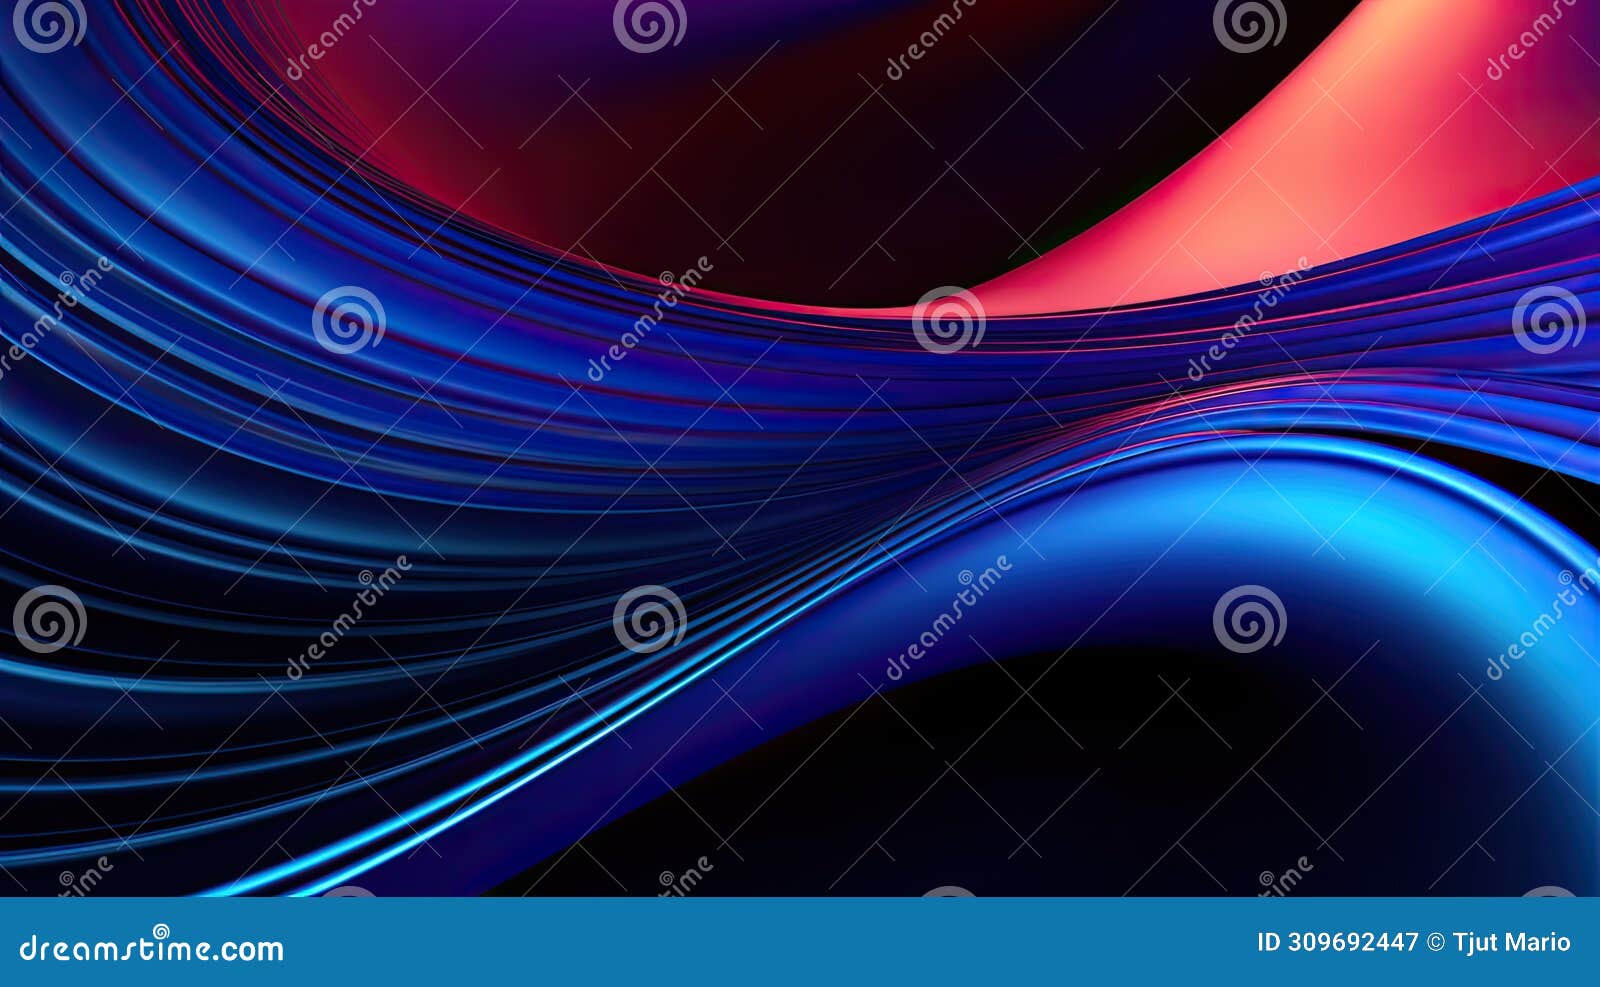 abstract amoled 3d background , a colorful journey into dimensional brilliance